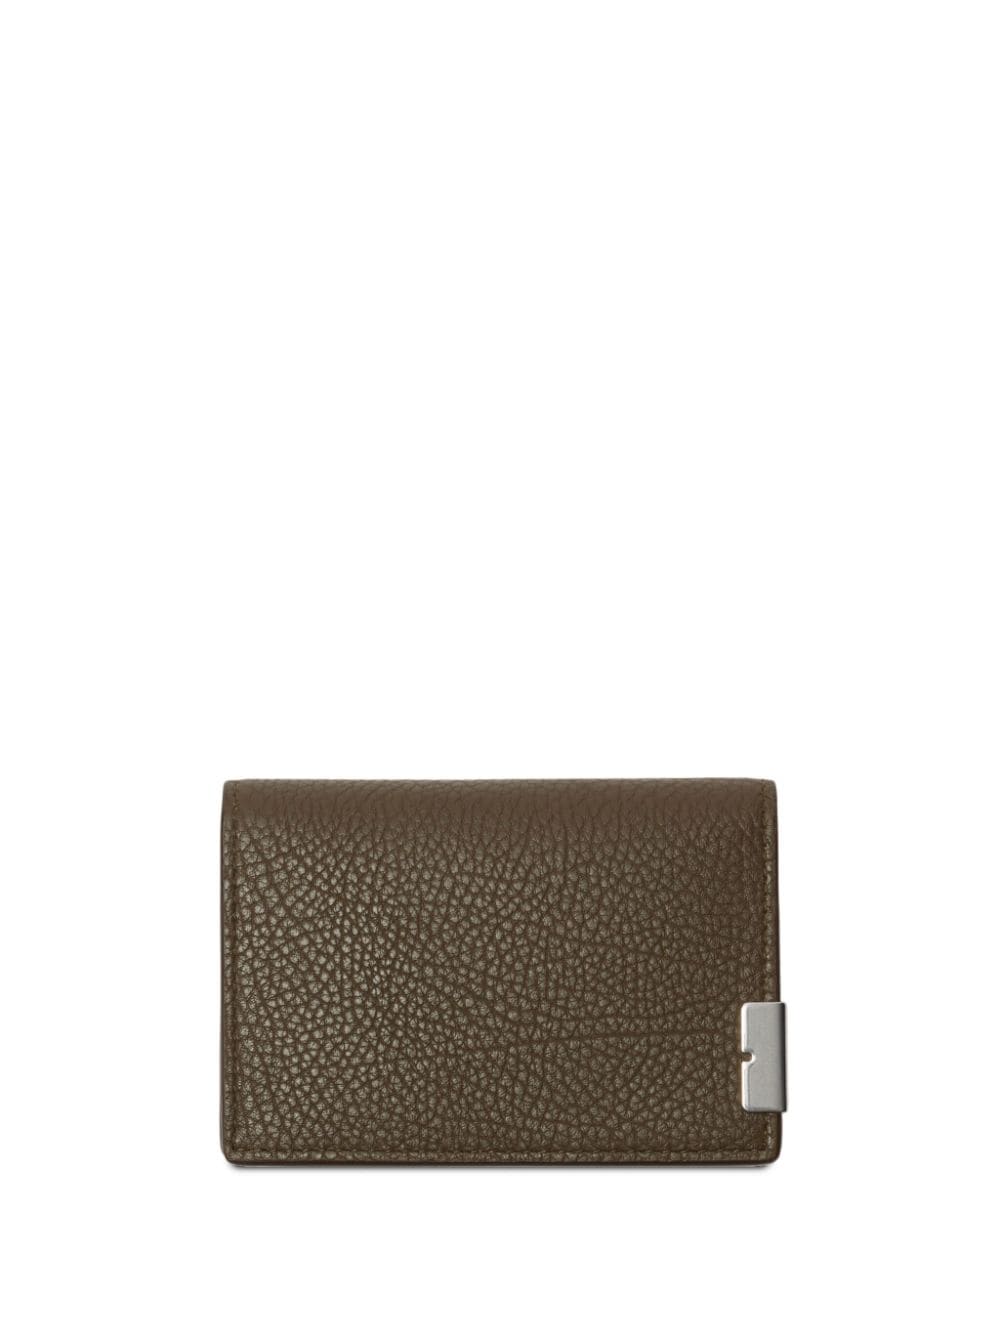 Burberry B Cut leather wallet - Brown von Burberry